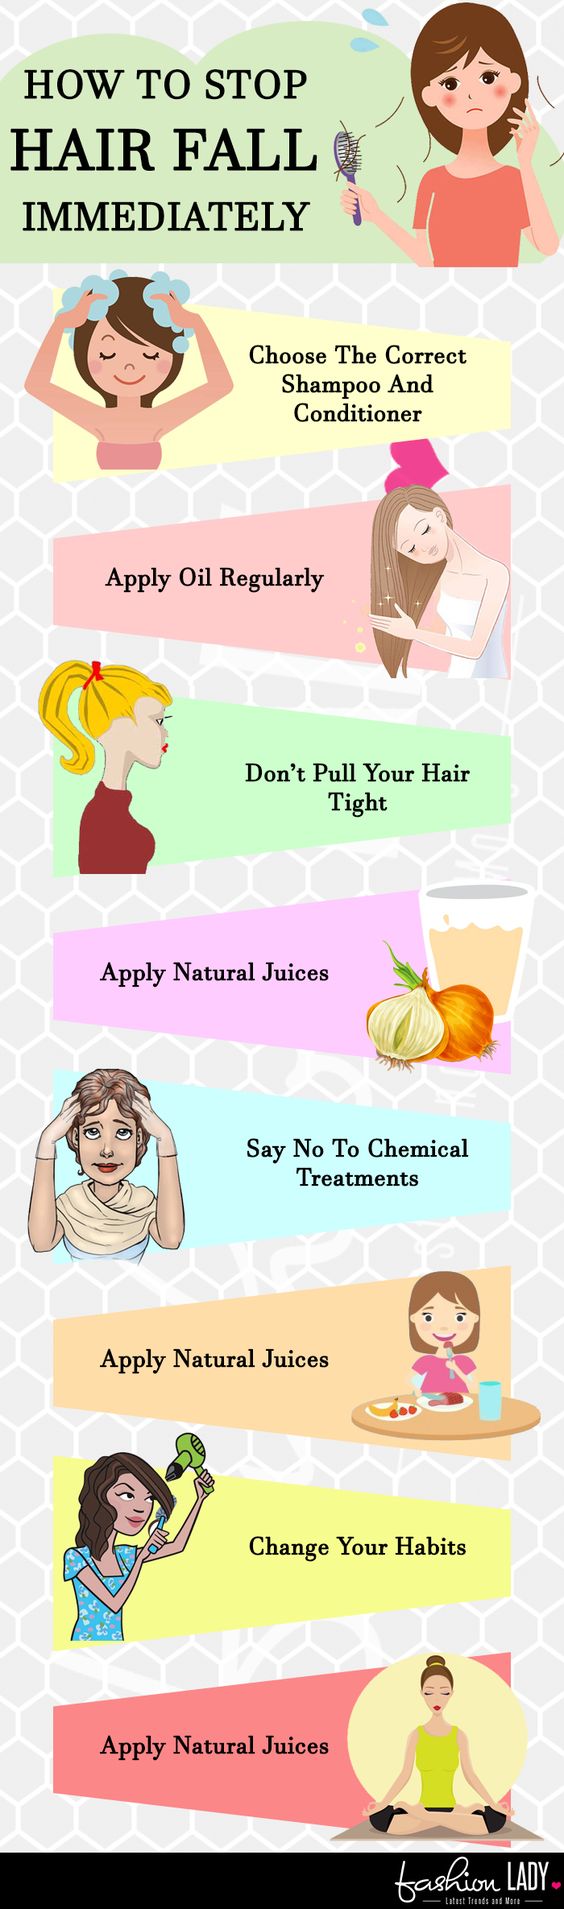 Here's How To Stop Hair Fall Immediately! 24 Tips And Tricks